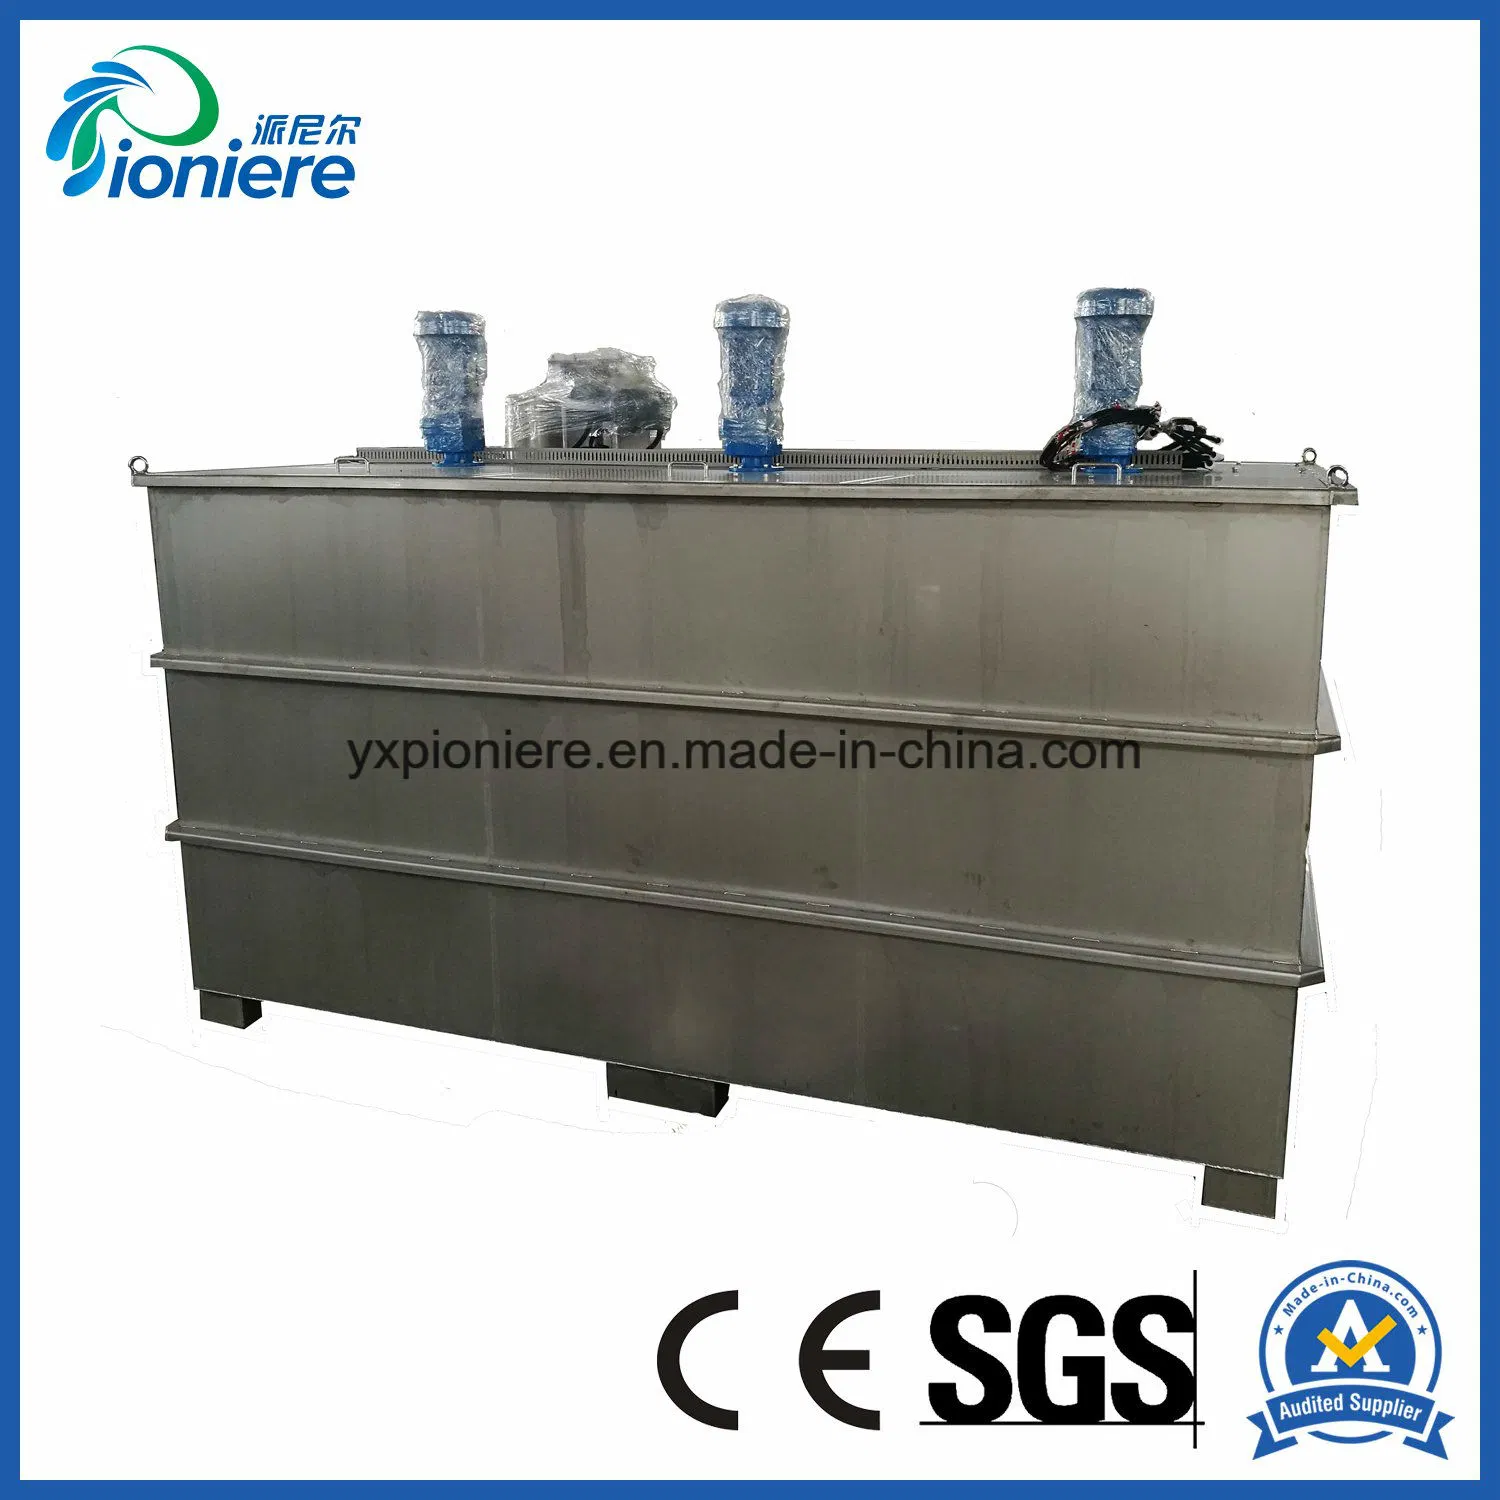 Large Size Polymer Dispensing Machine for Agricultural Wastewater Treatment Station